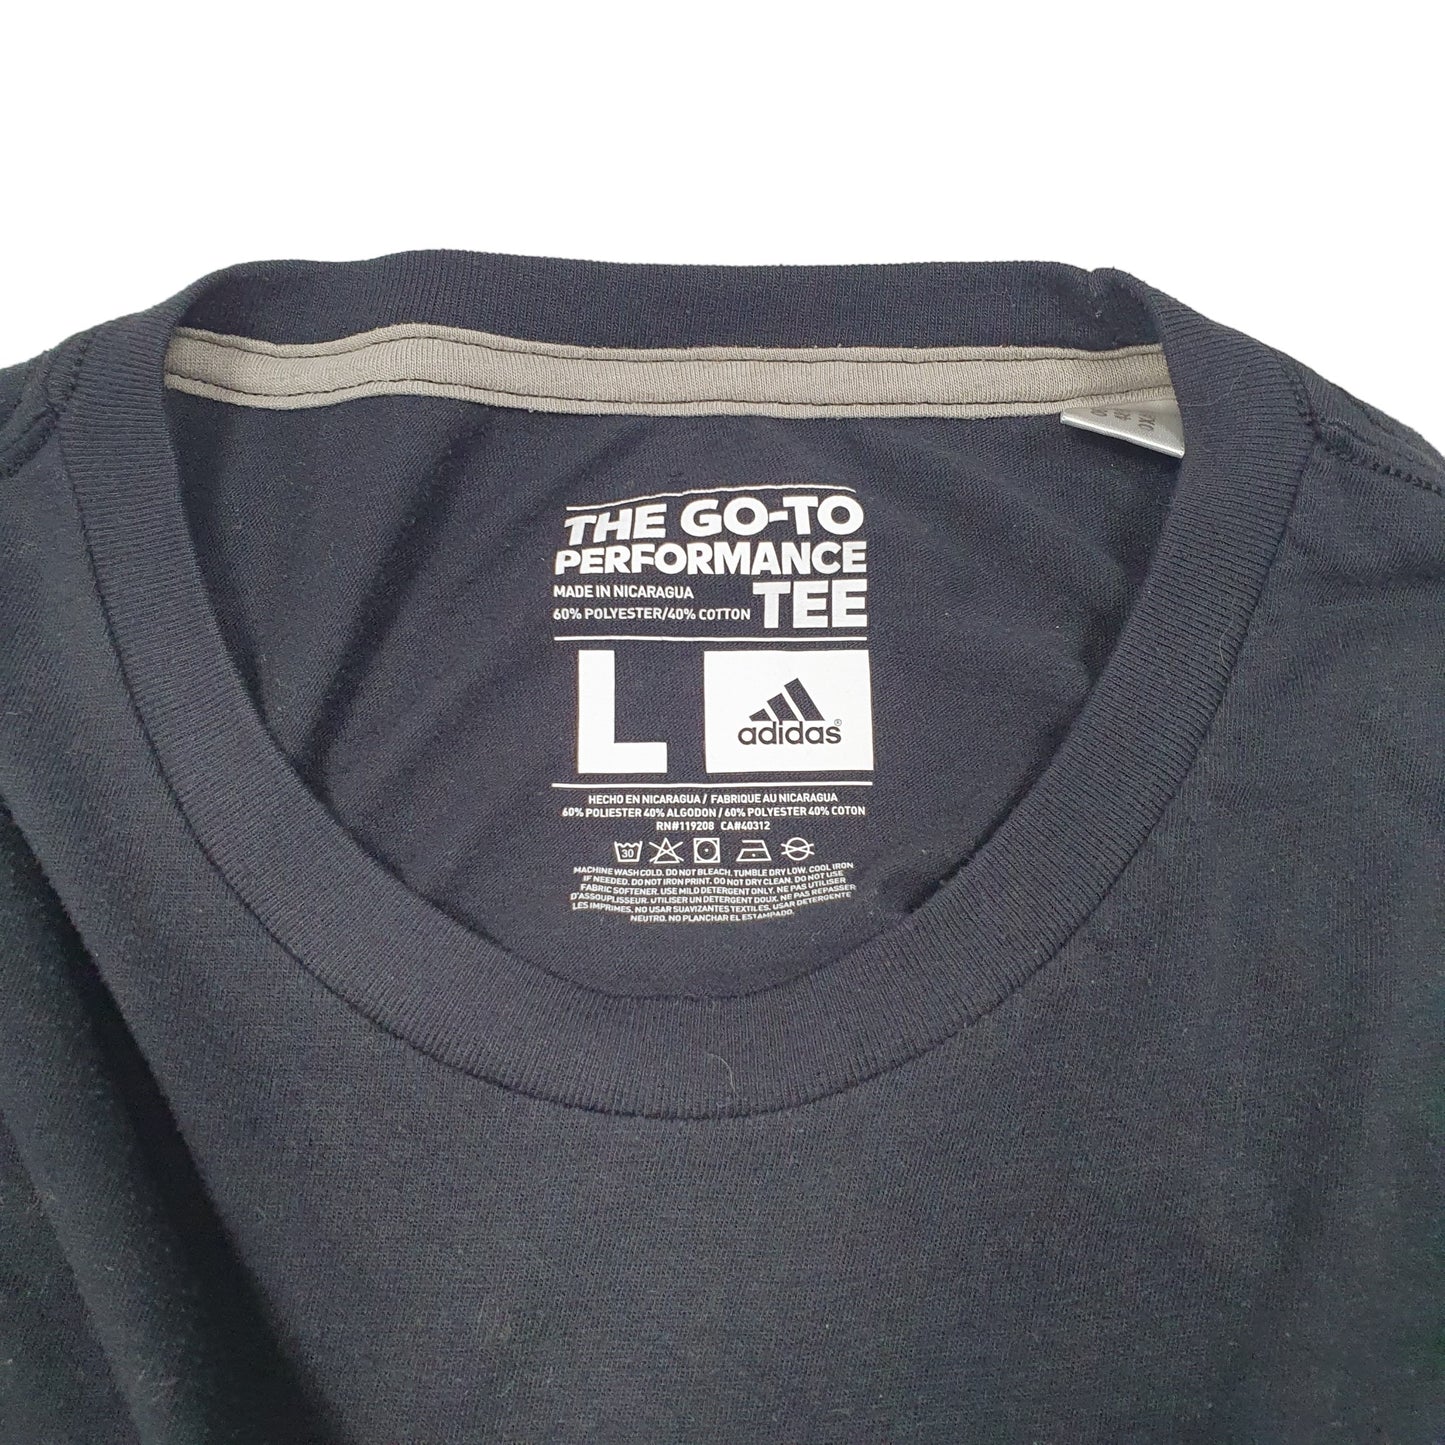 Mens Black Adidas Go To Performance Tee Spellout Climalite Short Sleeve T Shirt